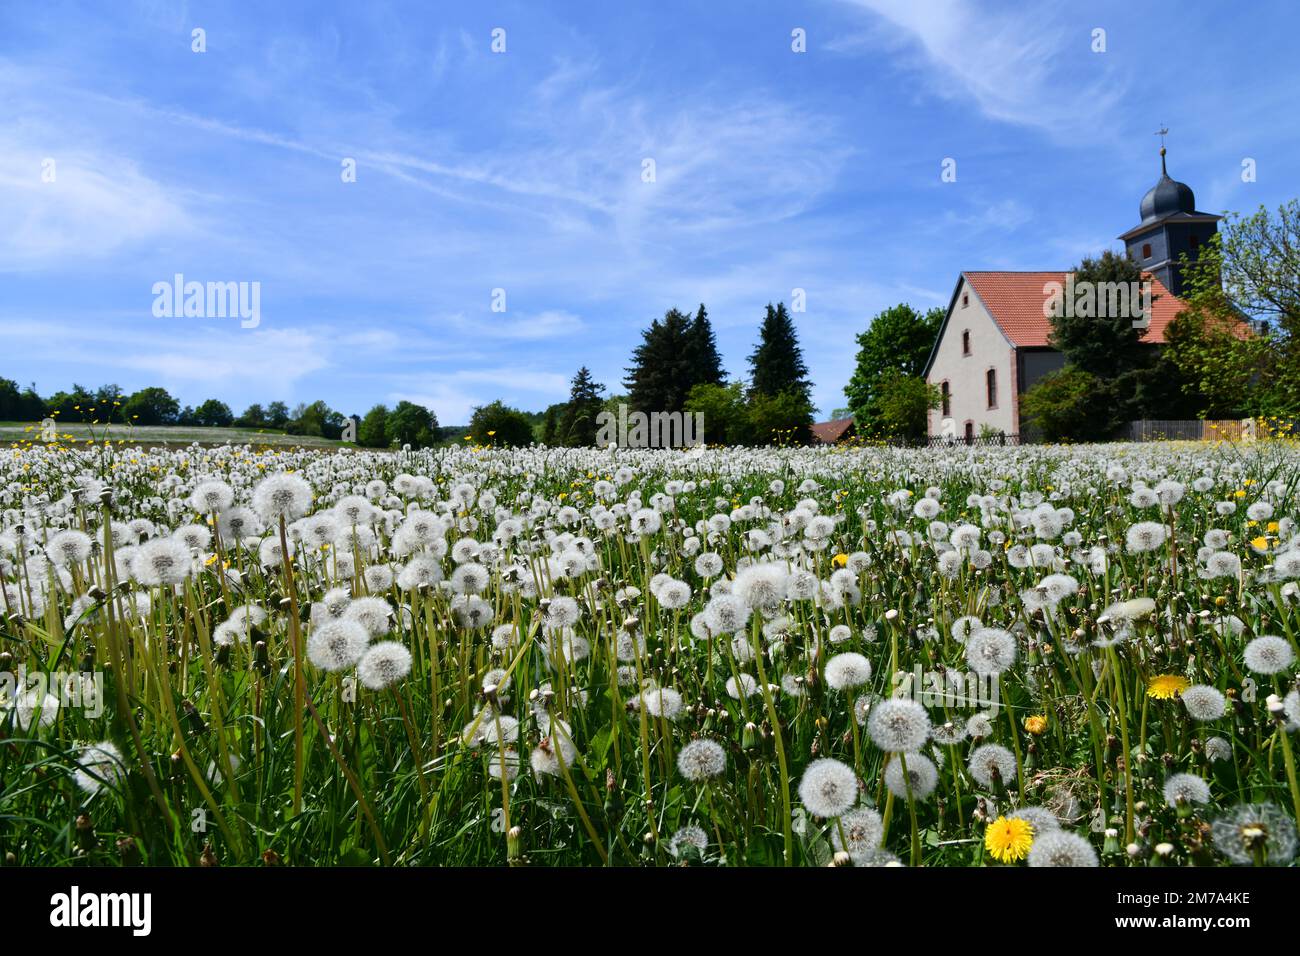 countless dandelions on a meadow Stock Photo